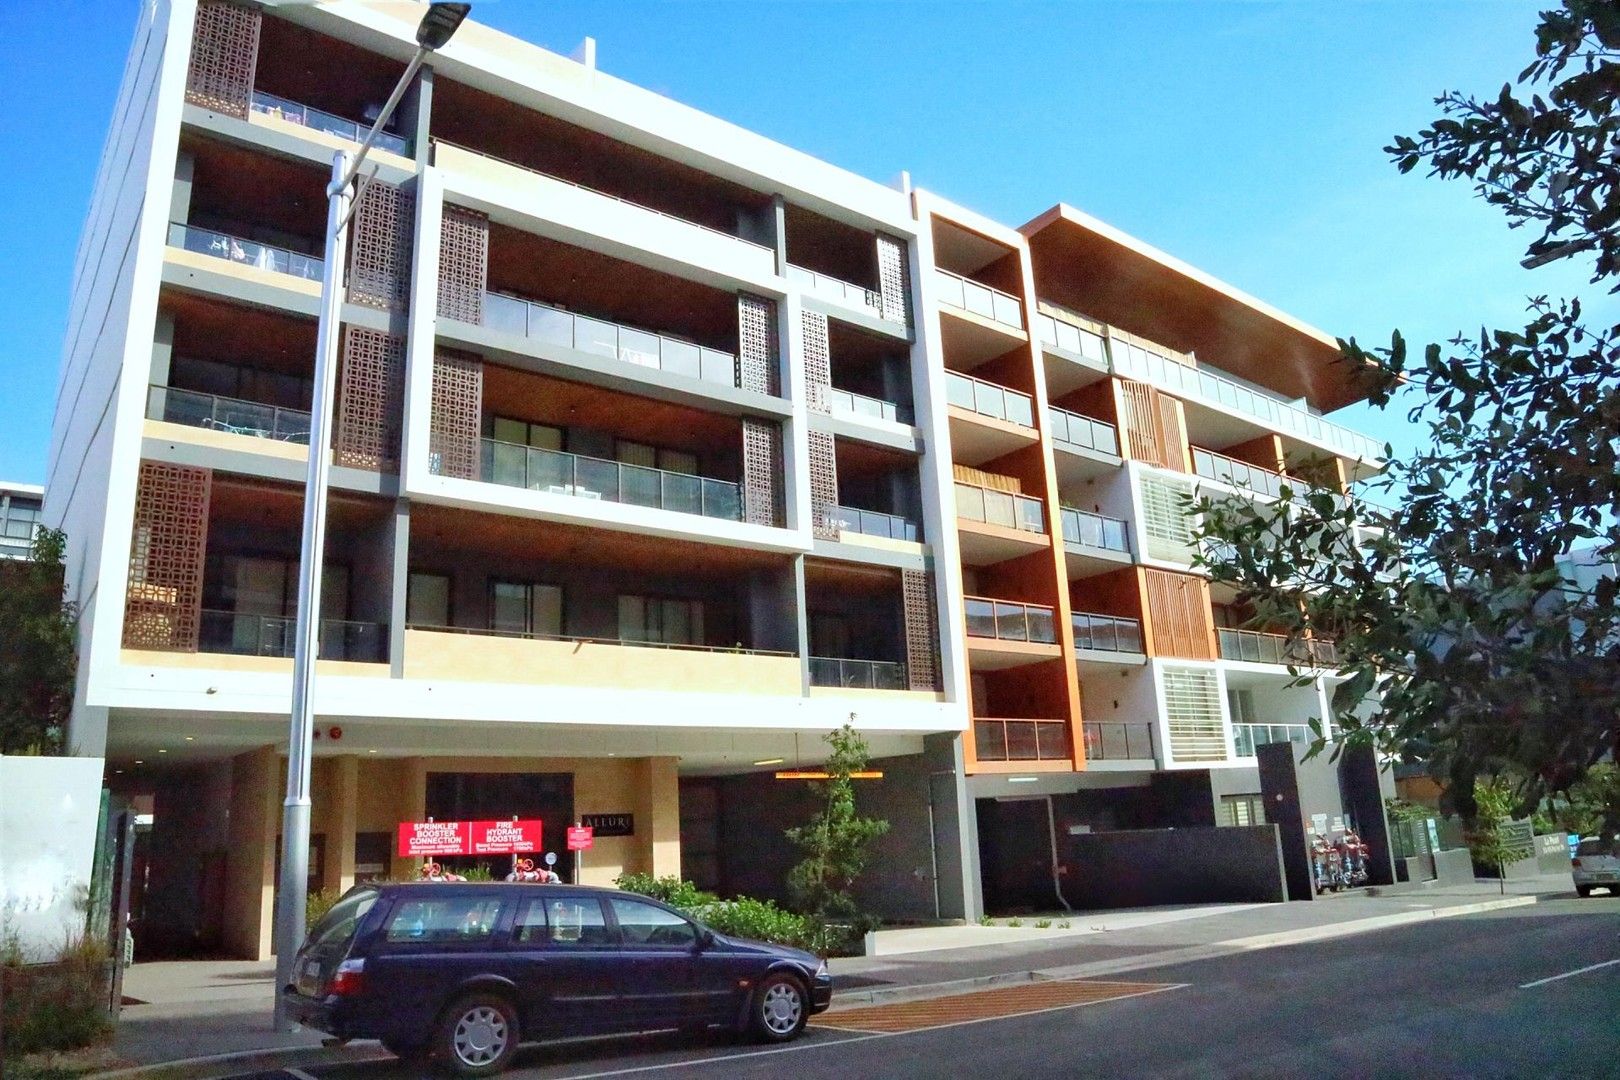 2 bedrooms Apartment / Unit / Flat in 11 Porter Street MEADOWBANK NSW, 2114